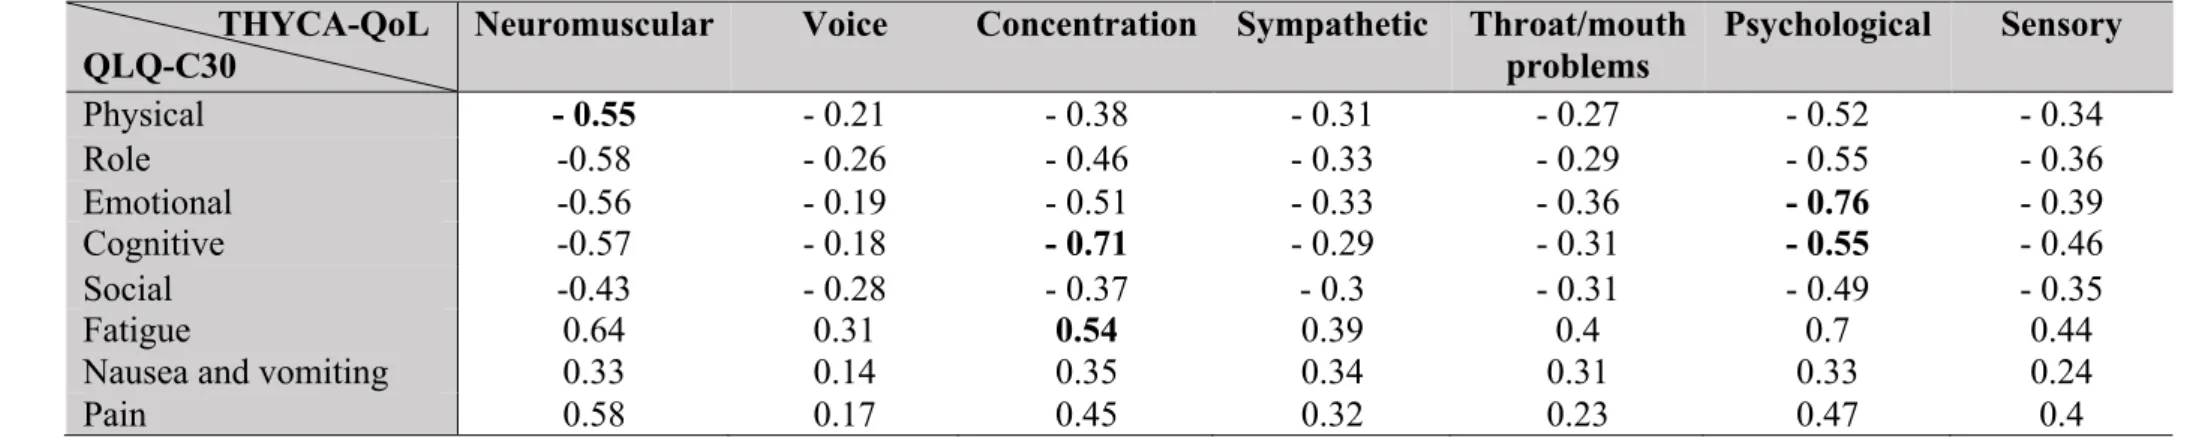 Table 5 : Interscale correlations between THYCA-QoL scales and QLQ-C30 scales (N = 280)